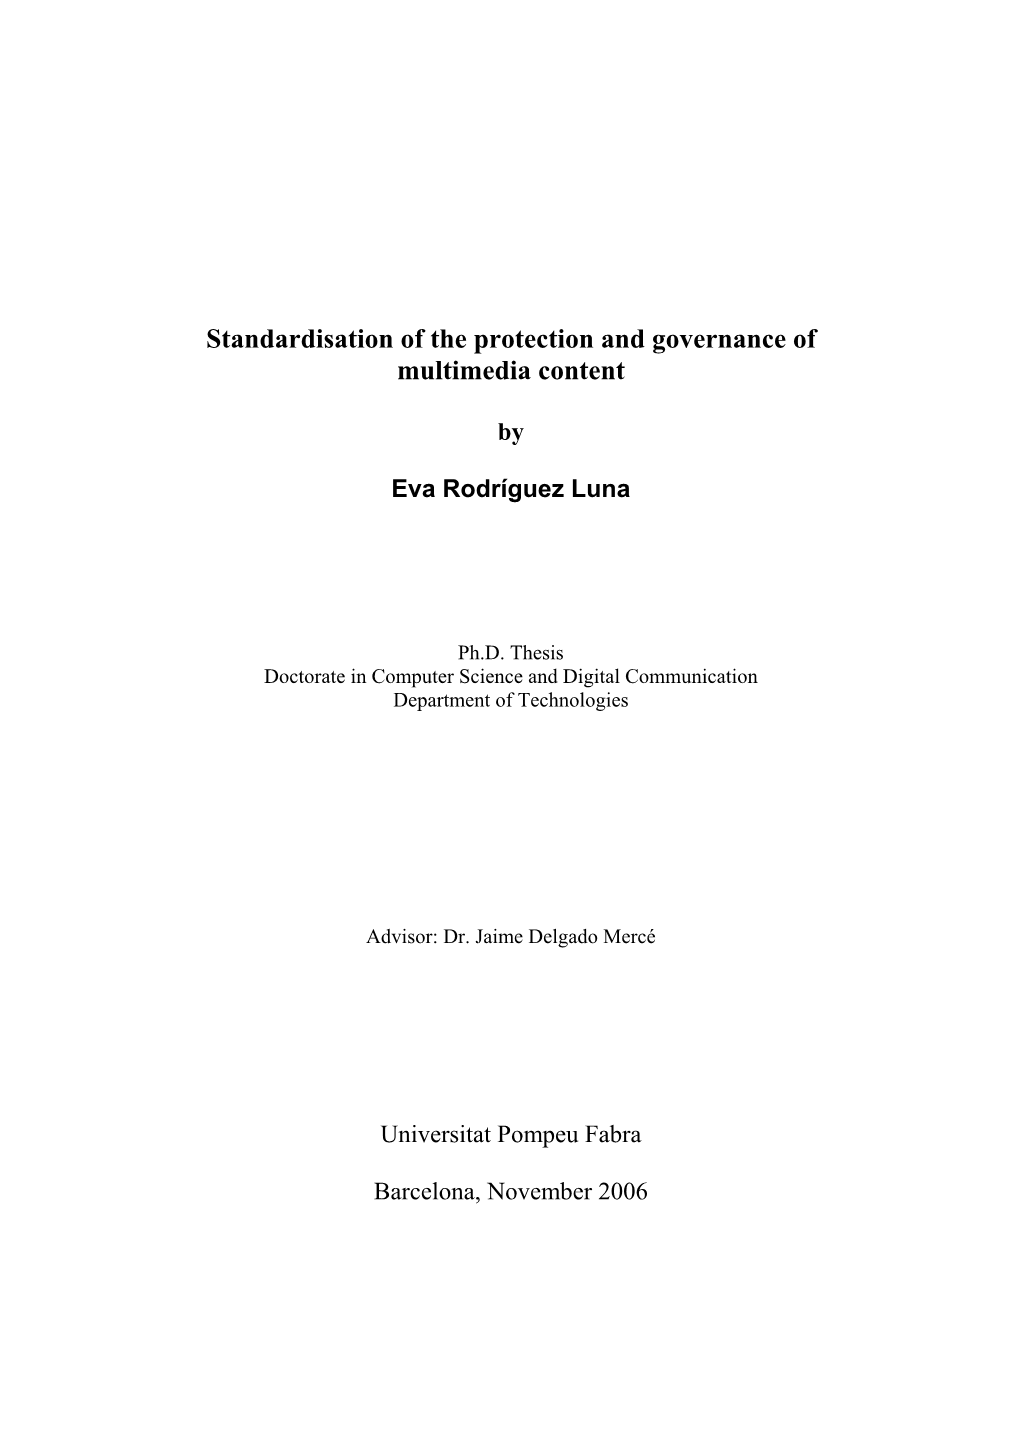 Standardisation of the Protection and Governance of Multimedia Content